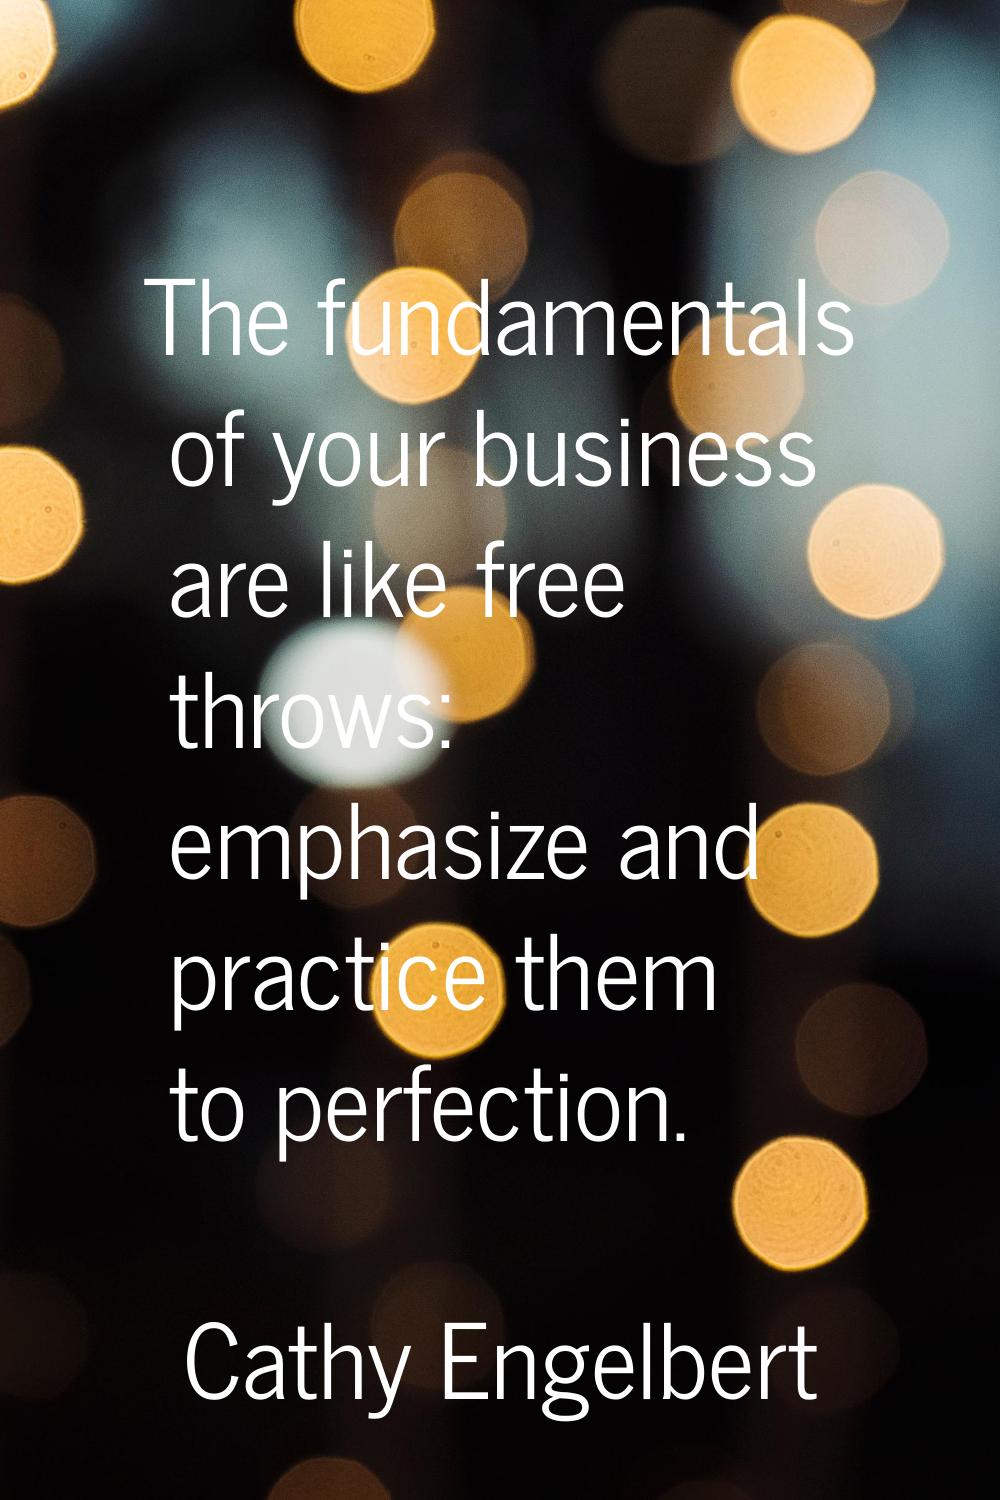 The fundamentals of your business are like free throws: emphasize and practice them to perfection.